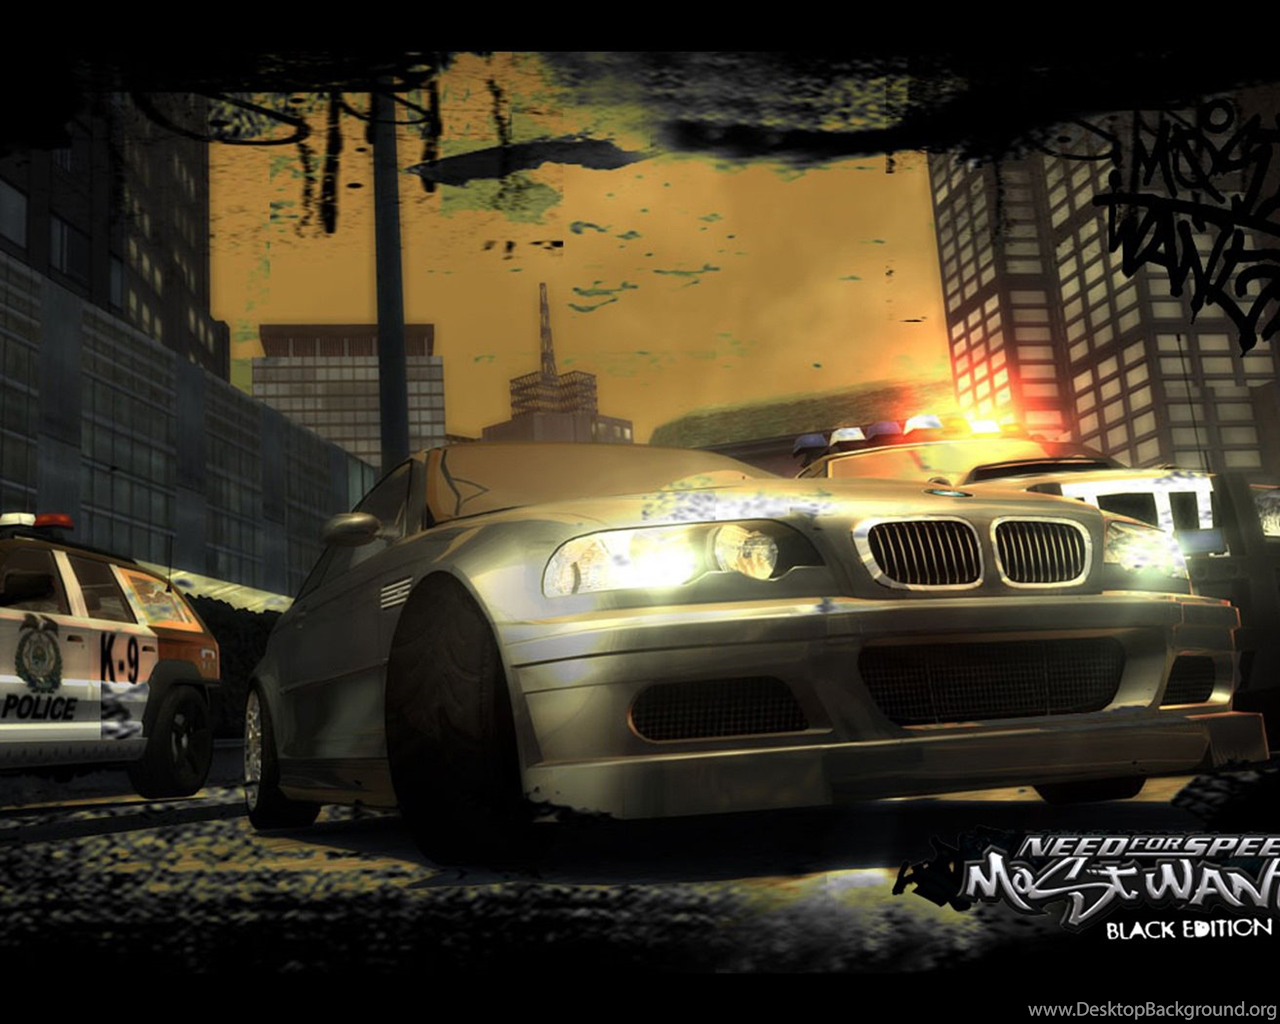 NFS most wanted 2005 мост. NFS most wanted 2005 БМВ. Нфс МВ 2005. NFS MW 2005 BMW. Песни из игры need for speed